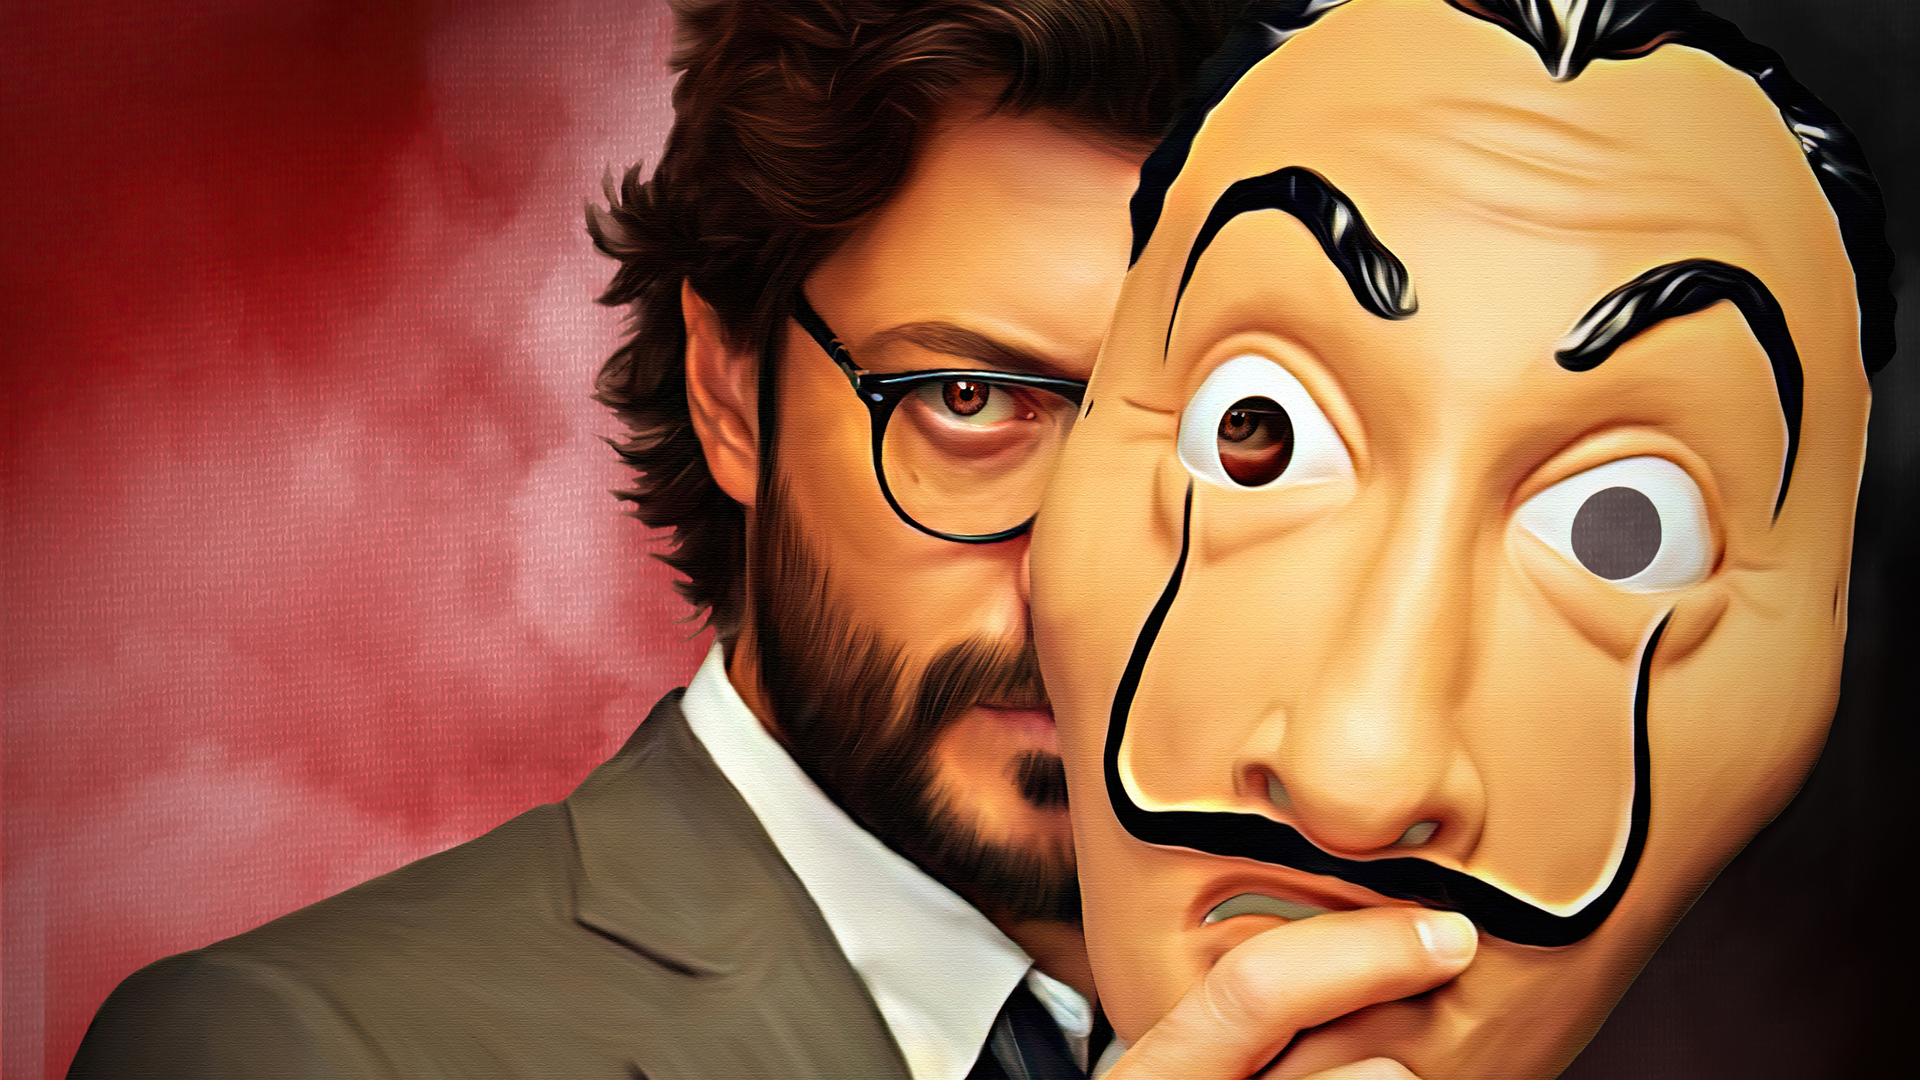 X the professor digital painting money heist laptop full hd p hd k wallpapers images backgrounds photos and pictures